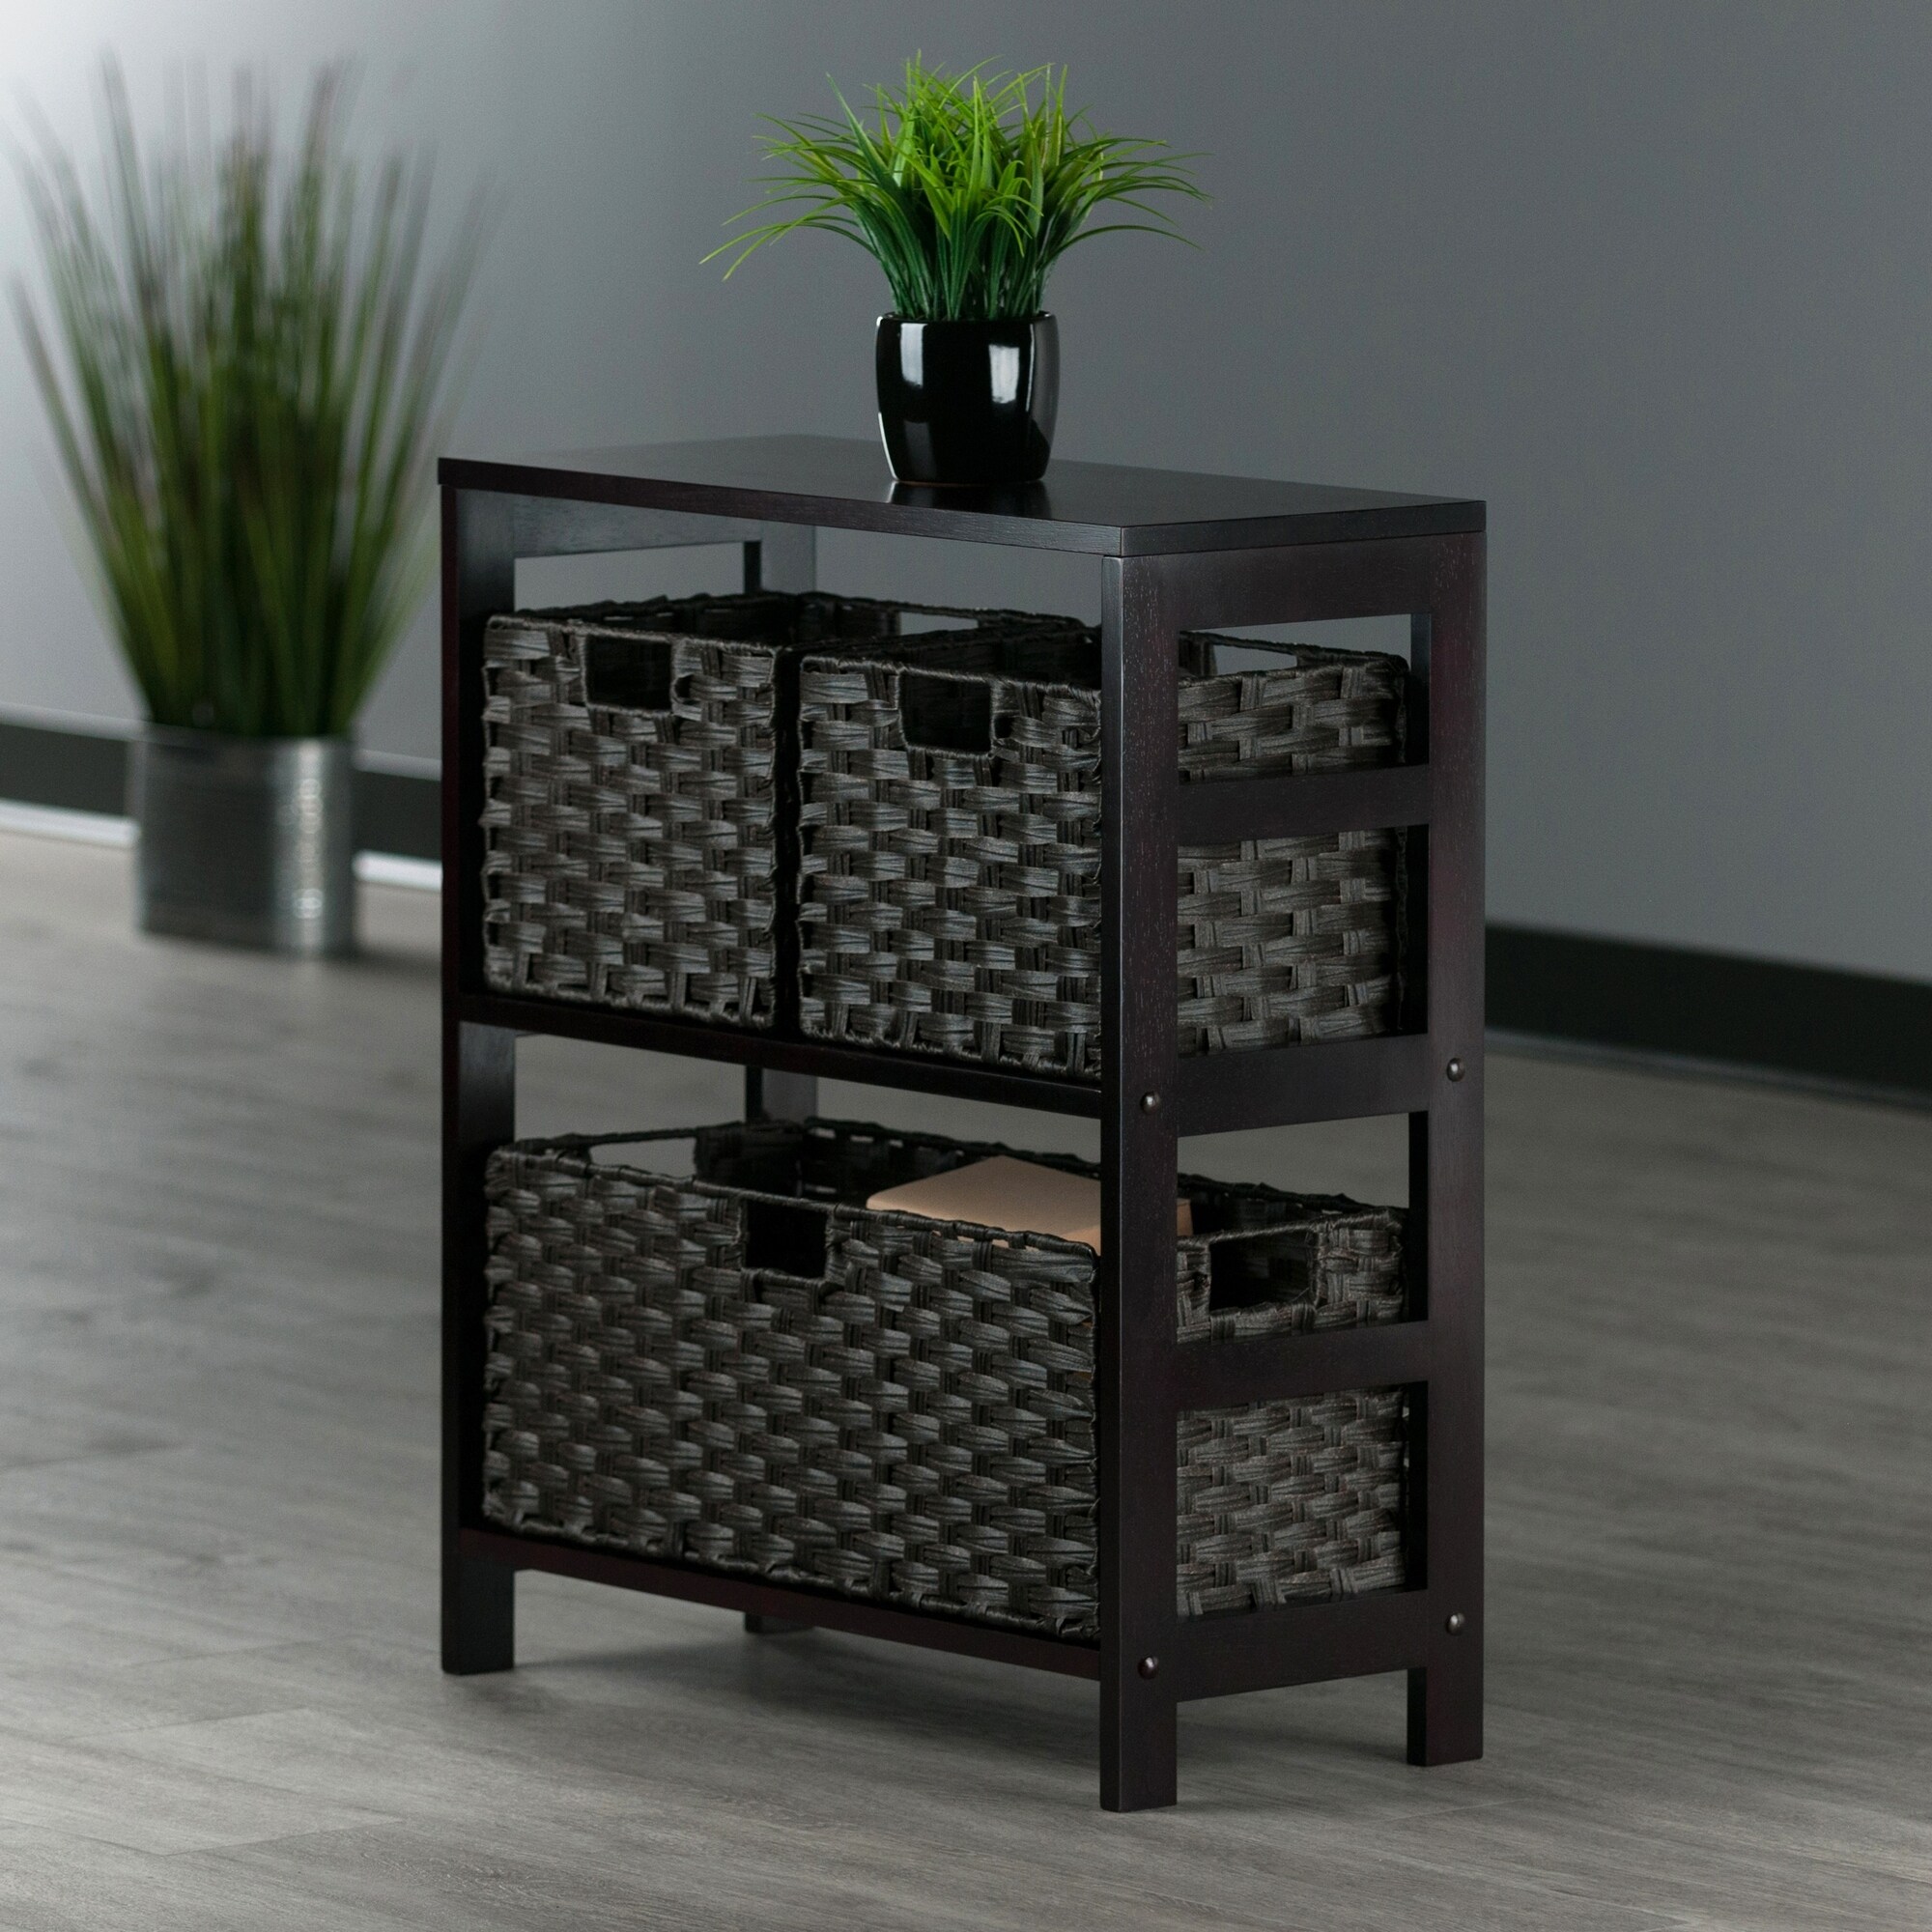 https://ak1.ostkcdn.com/images/products/is/images/direct/07f937bd48f8bbc6dea8d1c67abab694adb85dae/Leo-4-Pc-Storage-Shelf-with-3-Foldable-Woven-Baskets%2C-Espresso-and-Chocolate.jpg